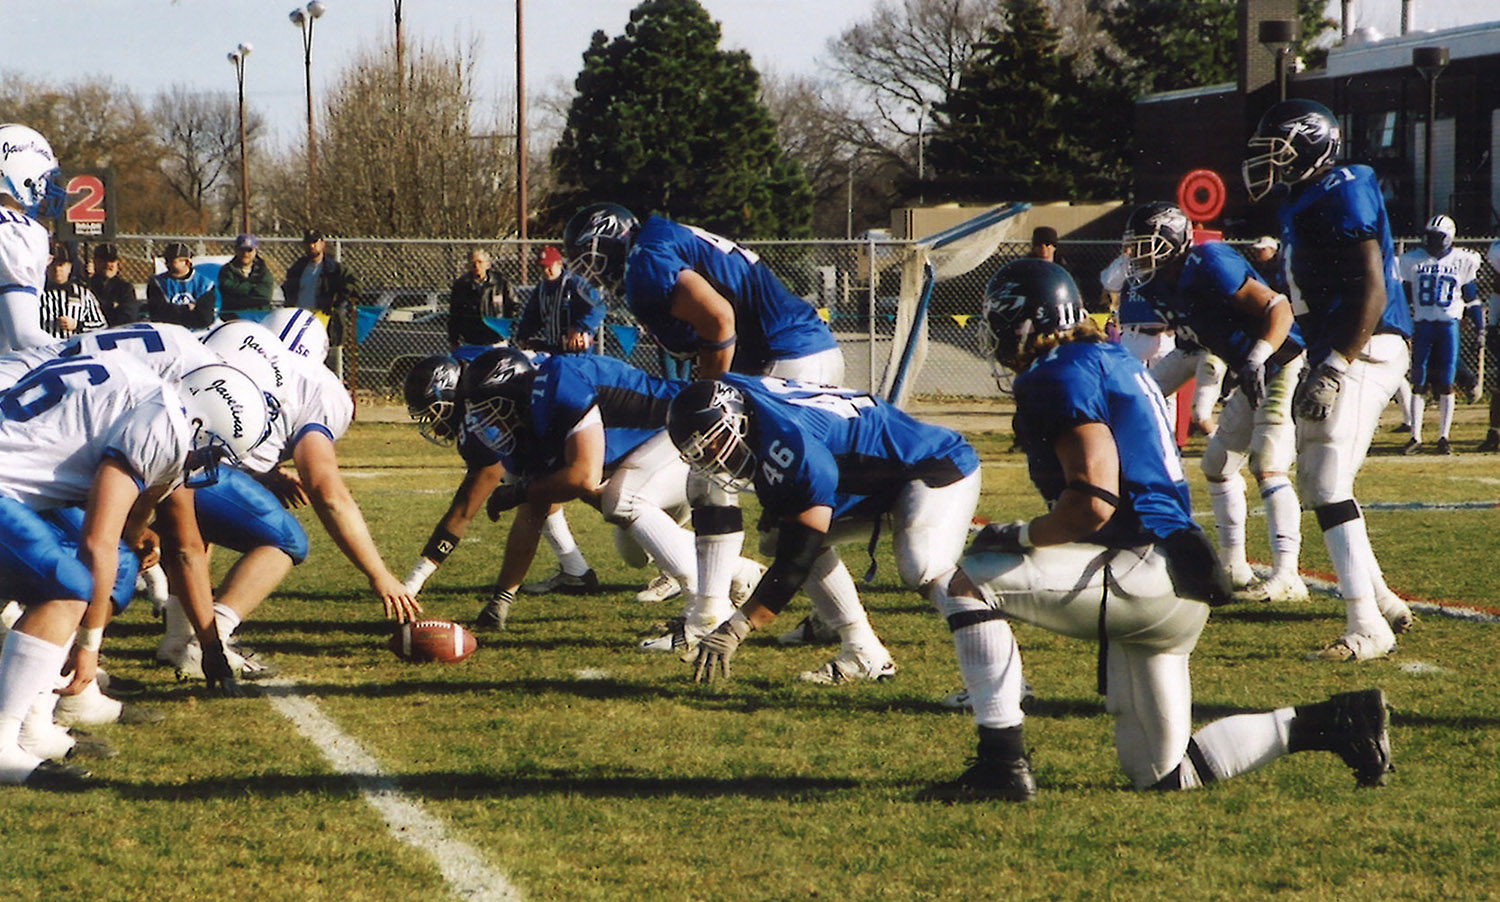 Brad Bohn (46) was a member of the UNK football team from 2001-04. (UNK Athletics)